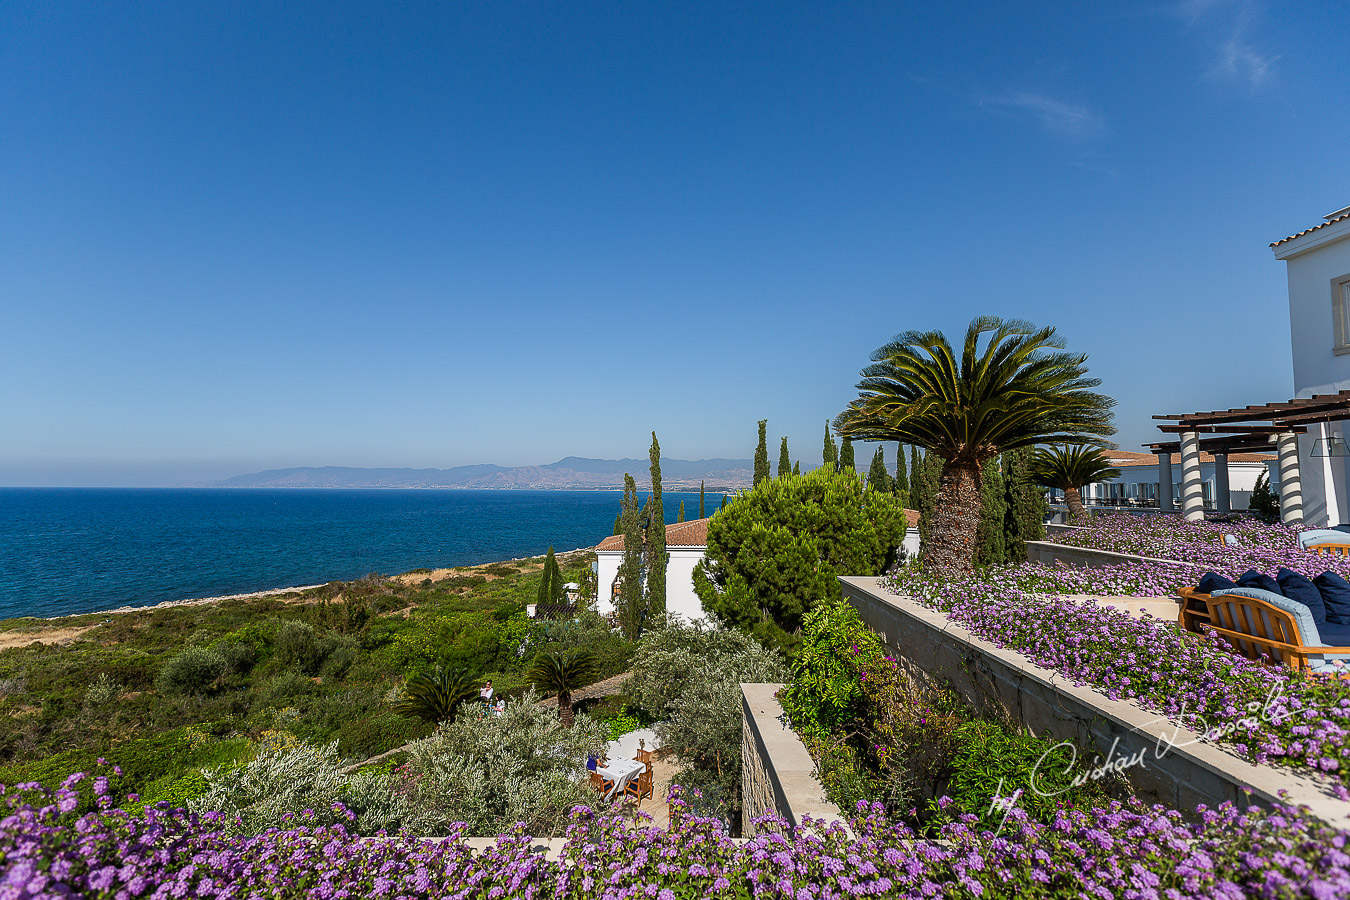 Breathtaking view at the beautiful Anassa Hotel photographed by Cyprus Photographer Cristian Dascalu.